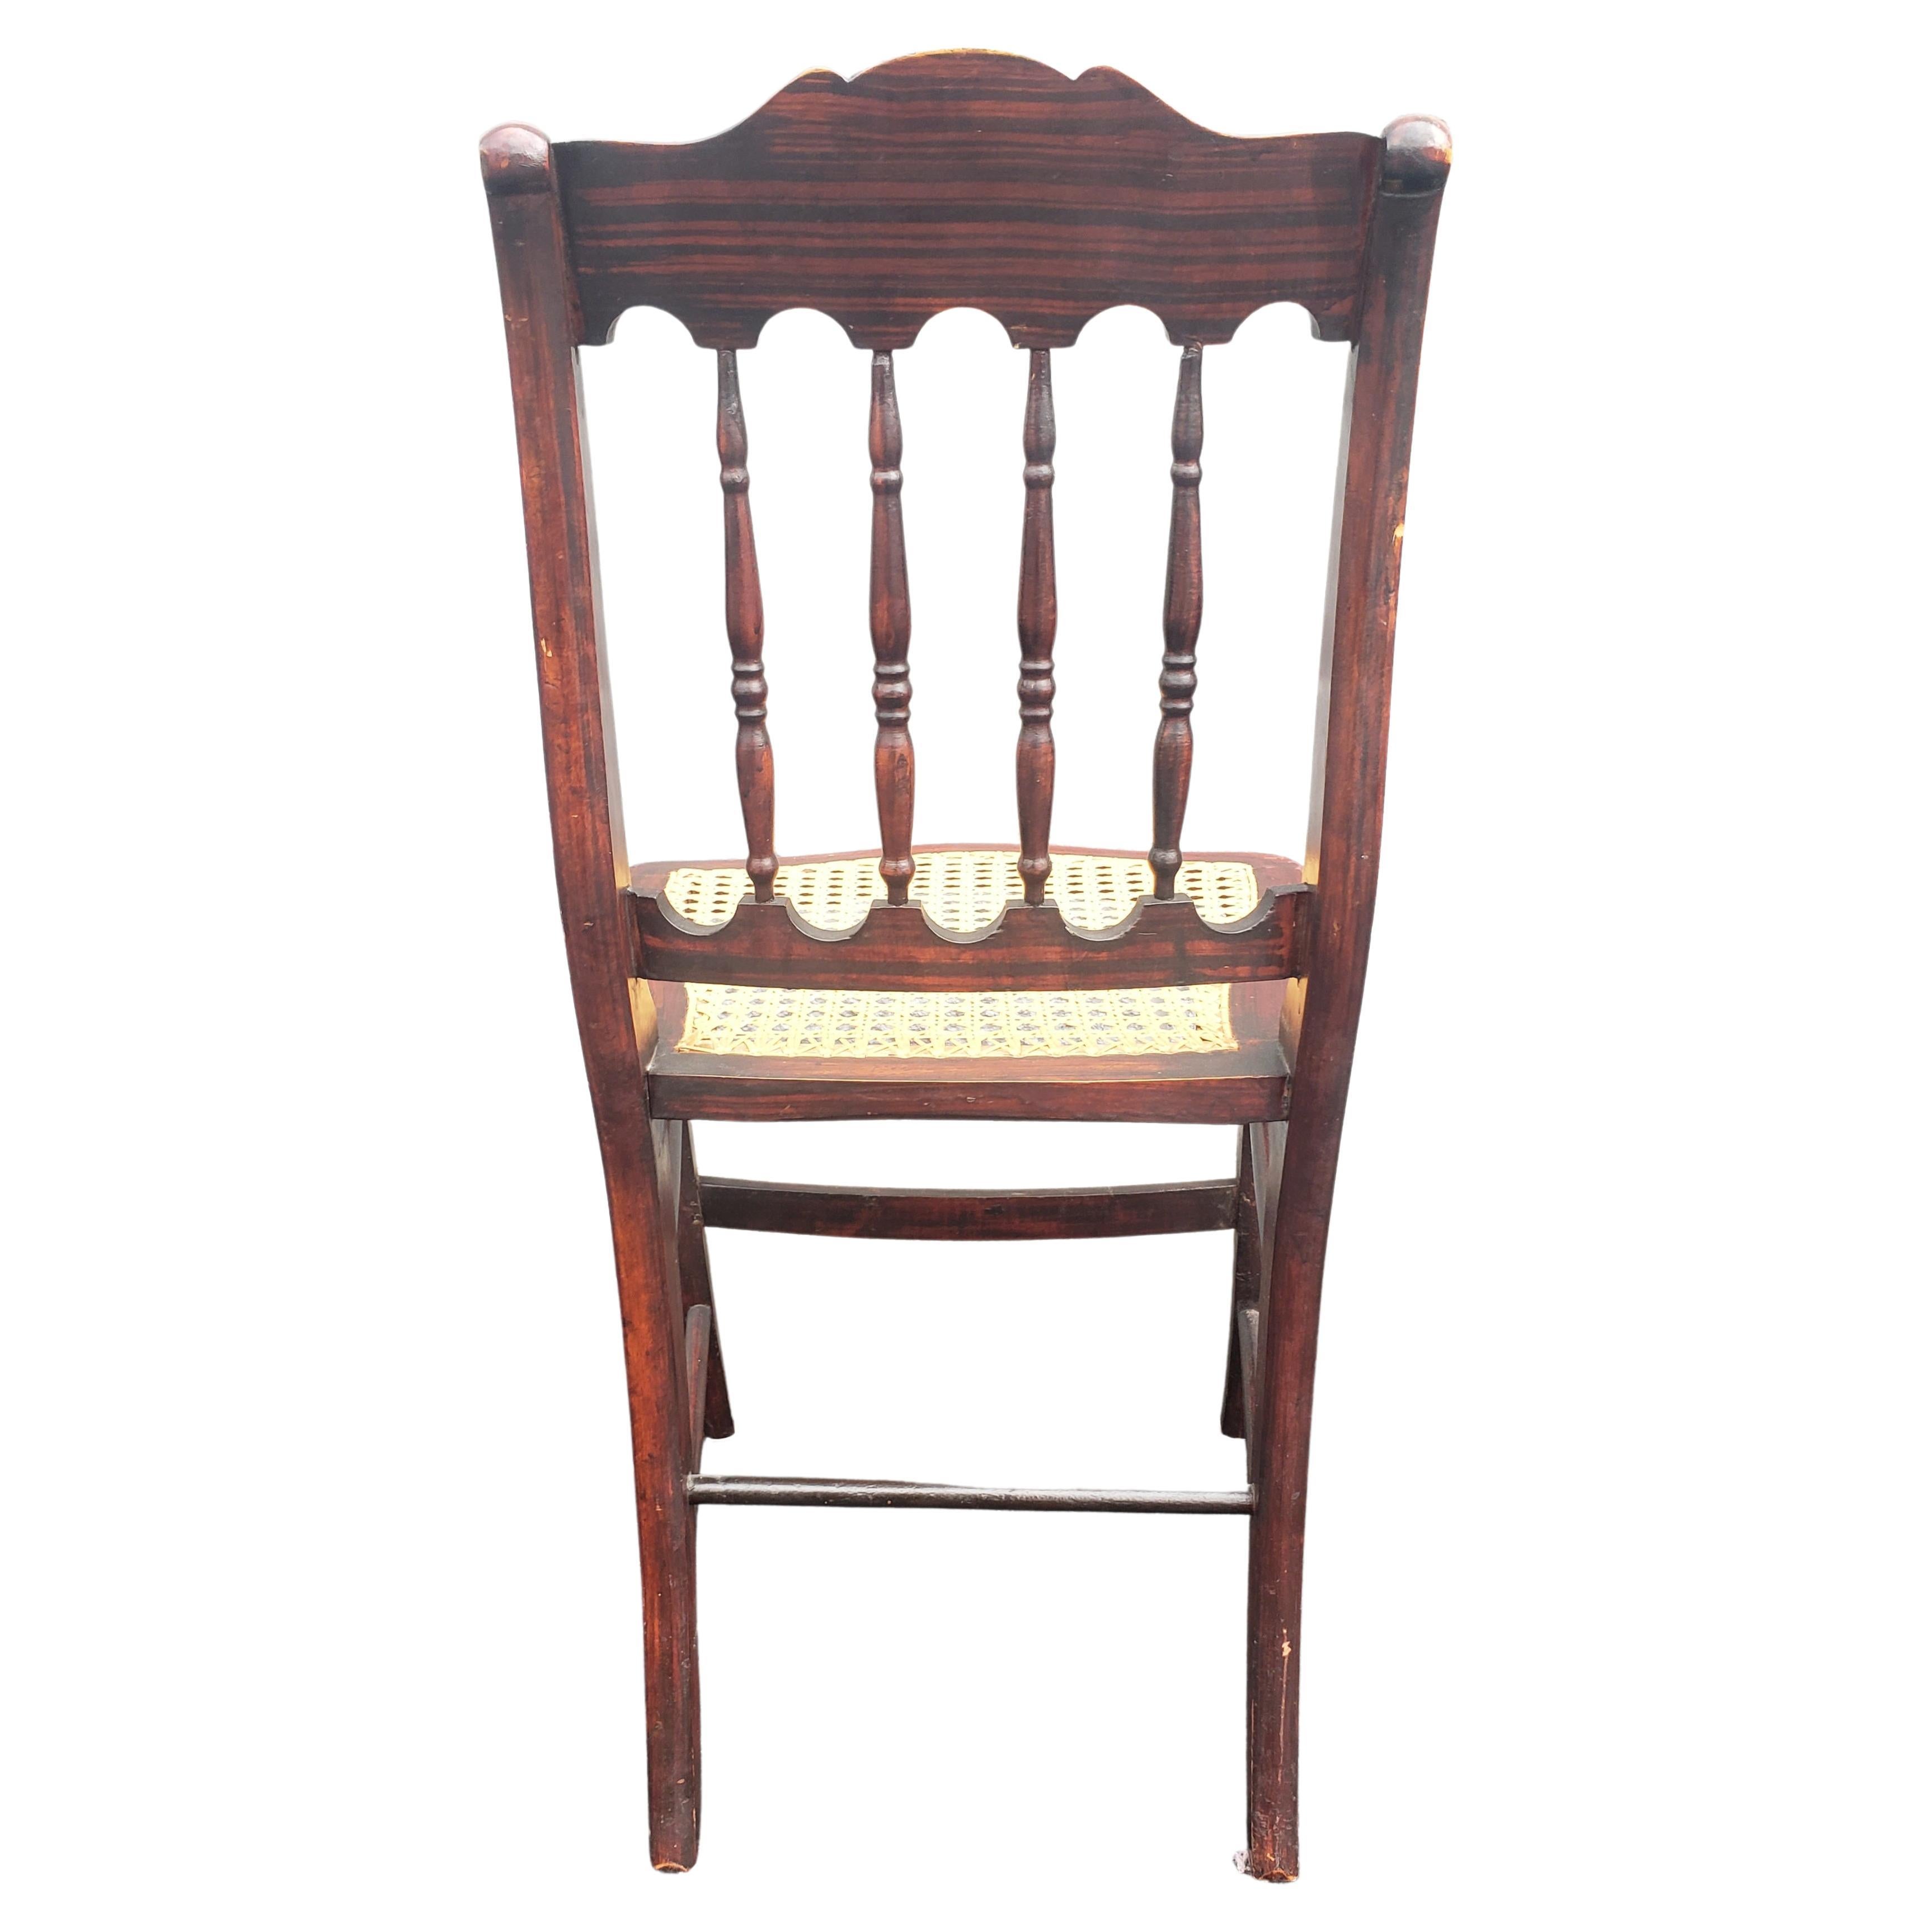 Victorian American Flame Mahogany with Inlays Spindle Back and Cane Seat Chair For Sale 1